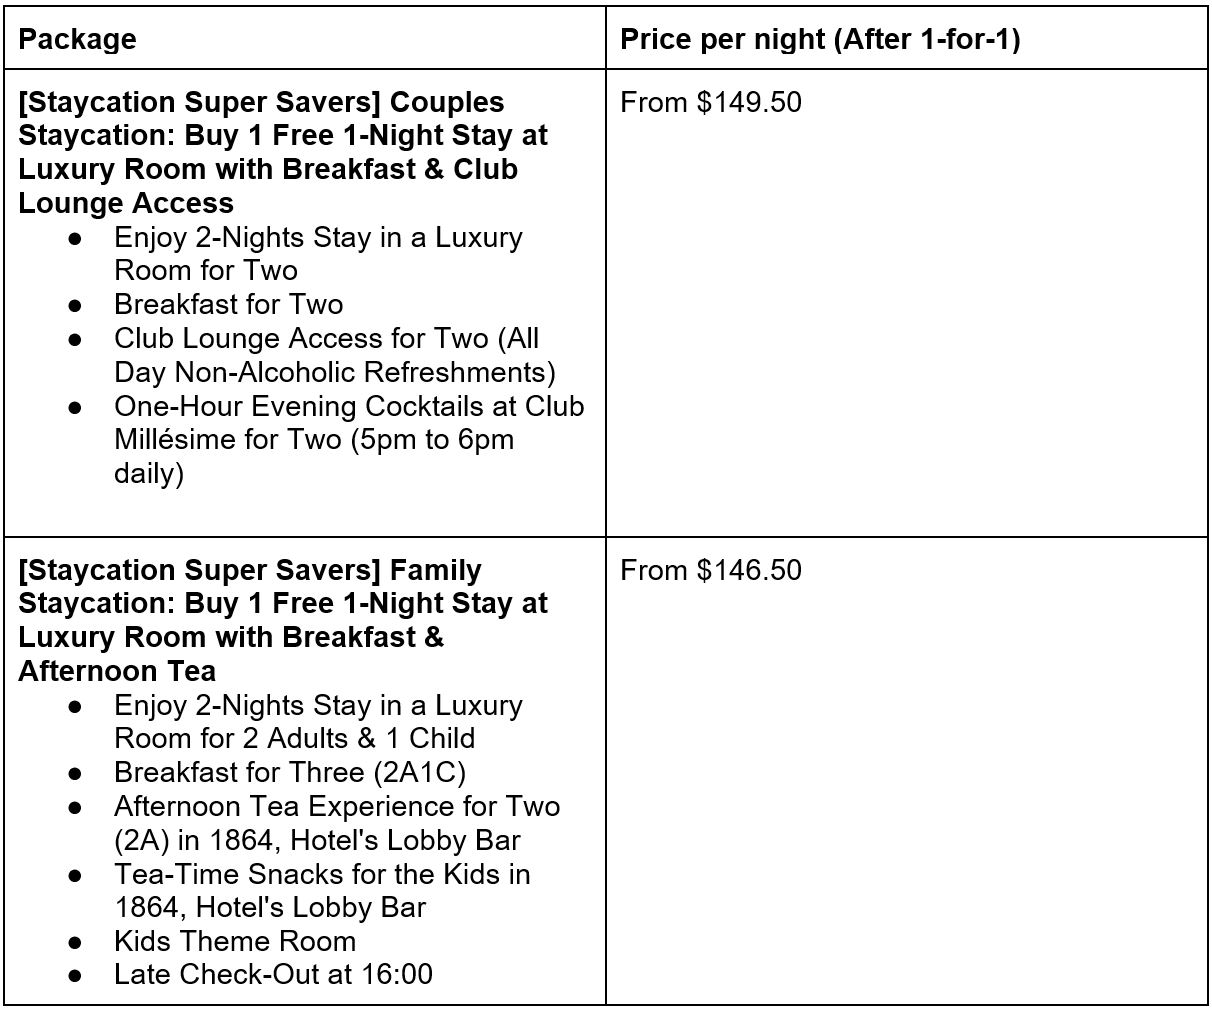 Klook Staycation Deals: 1-For-1 Packages With Breakfast & Club Access From $165/Night - 2